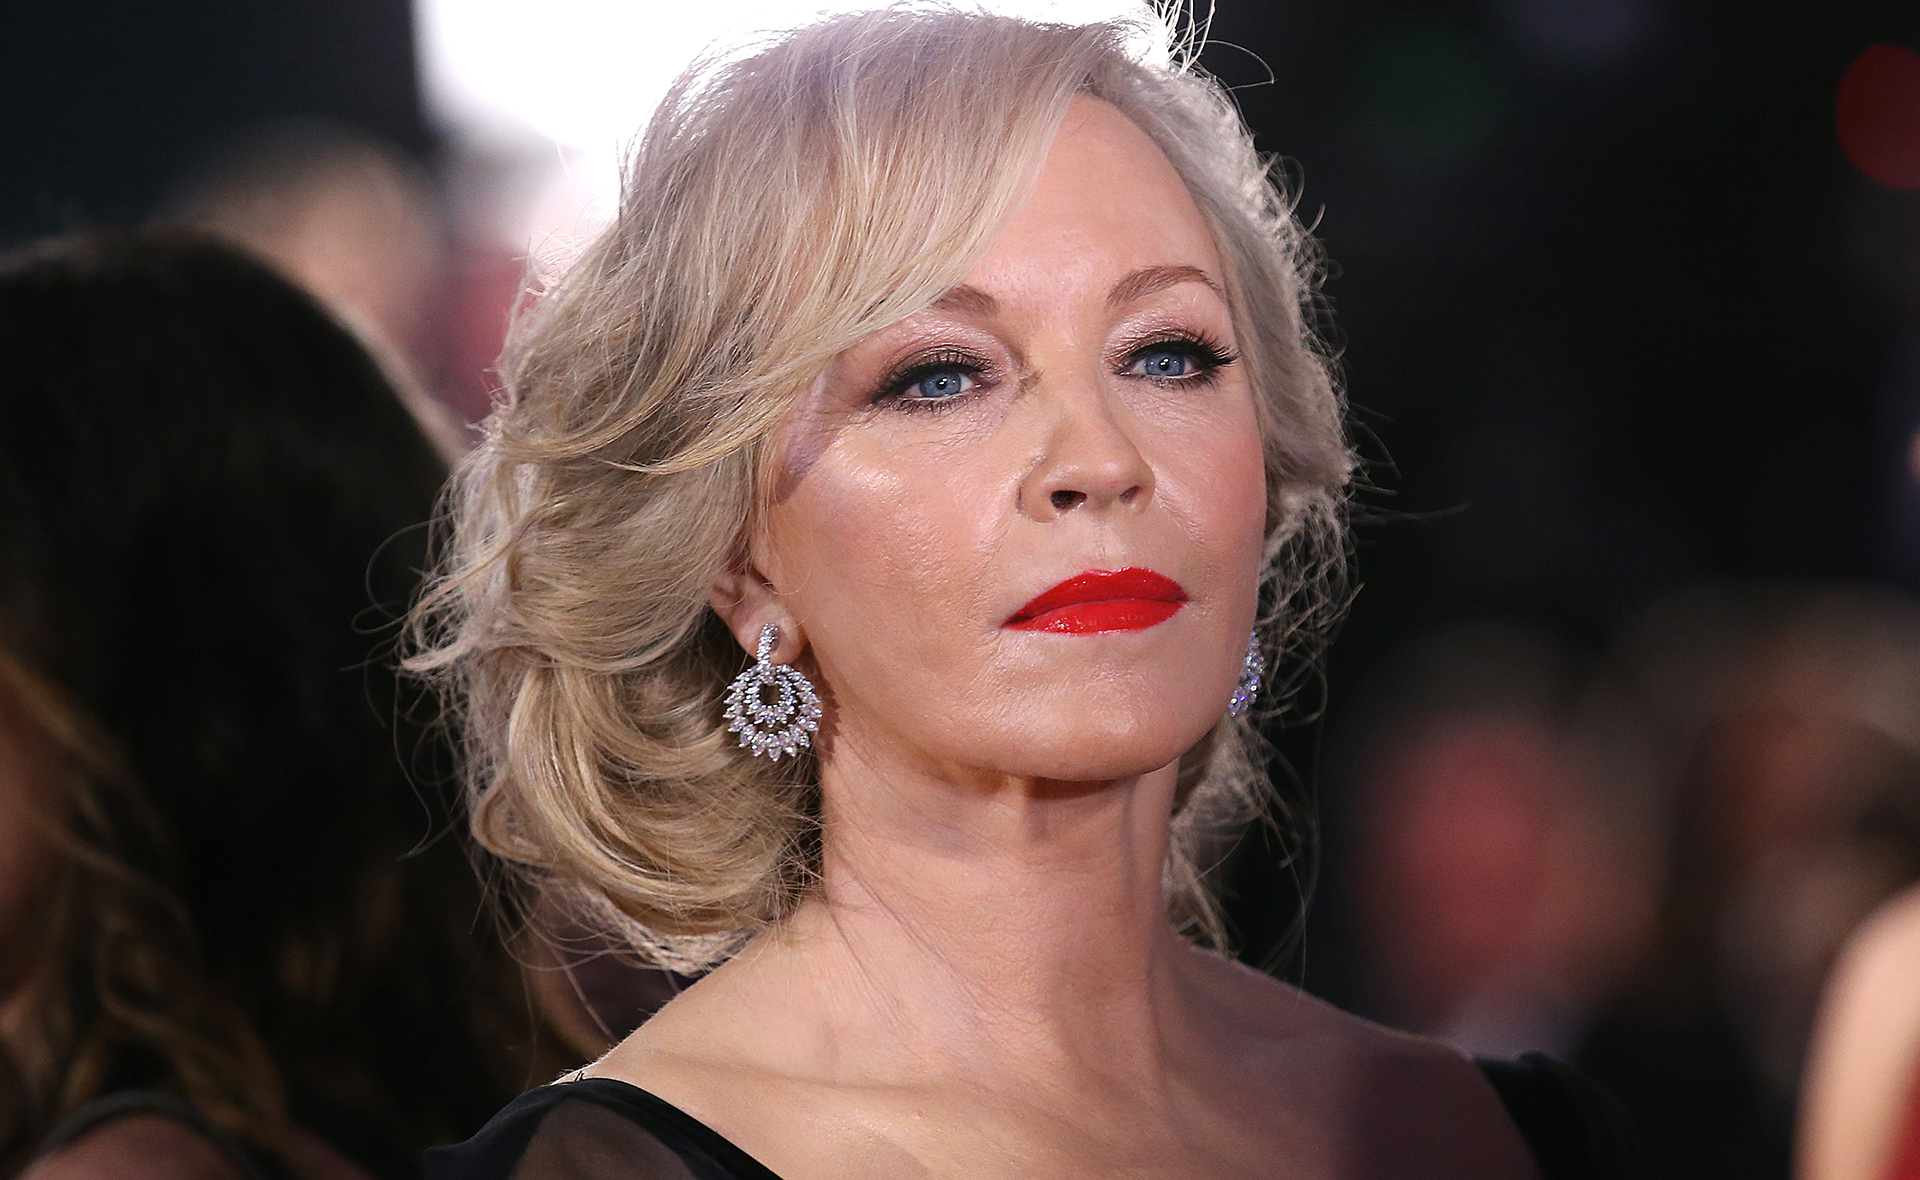 Rebecca Gibney reflects on her own experience with domestic violence in an impassioned plea calling for more awareness